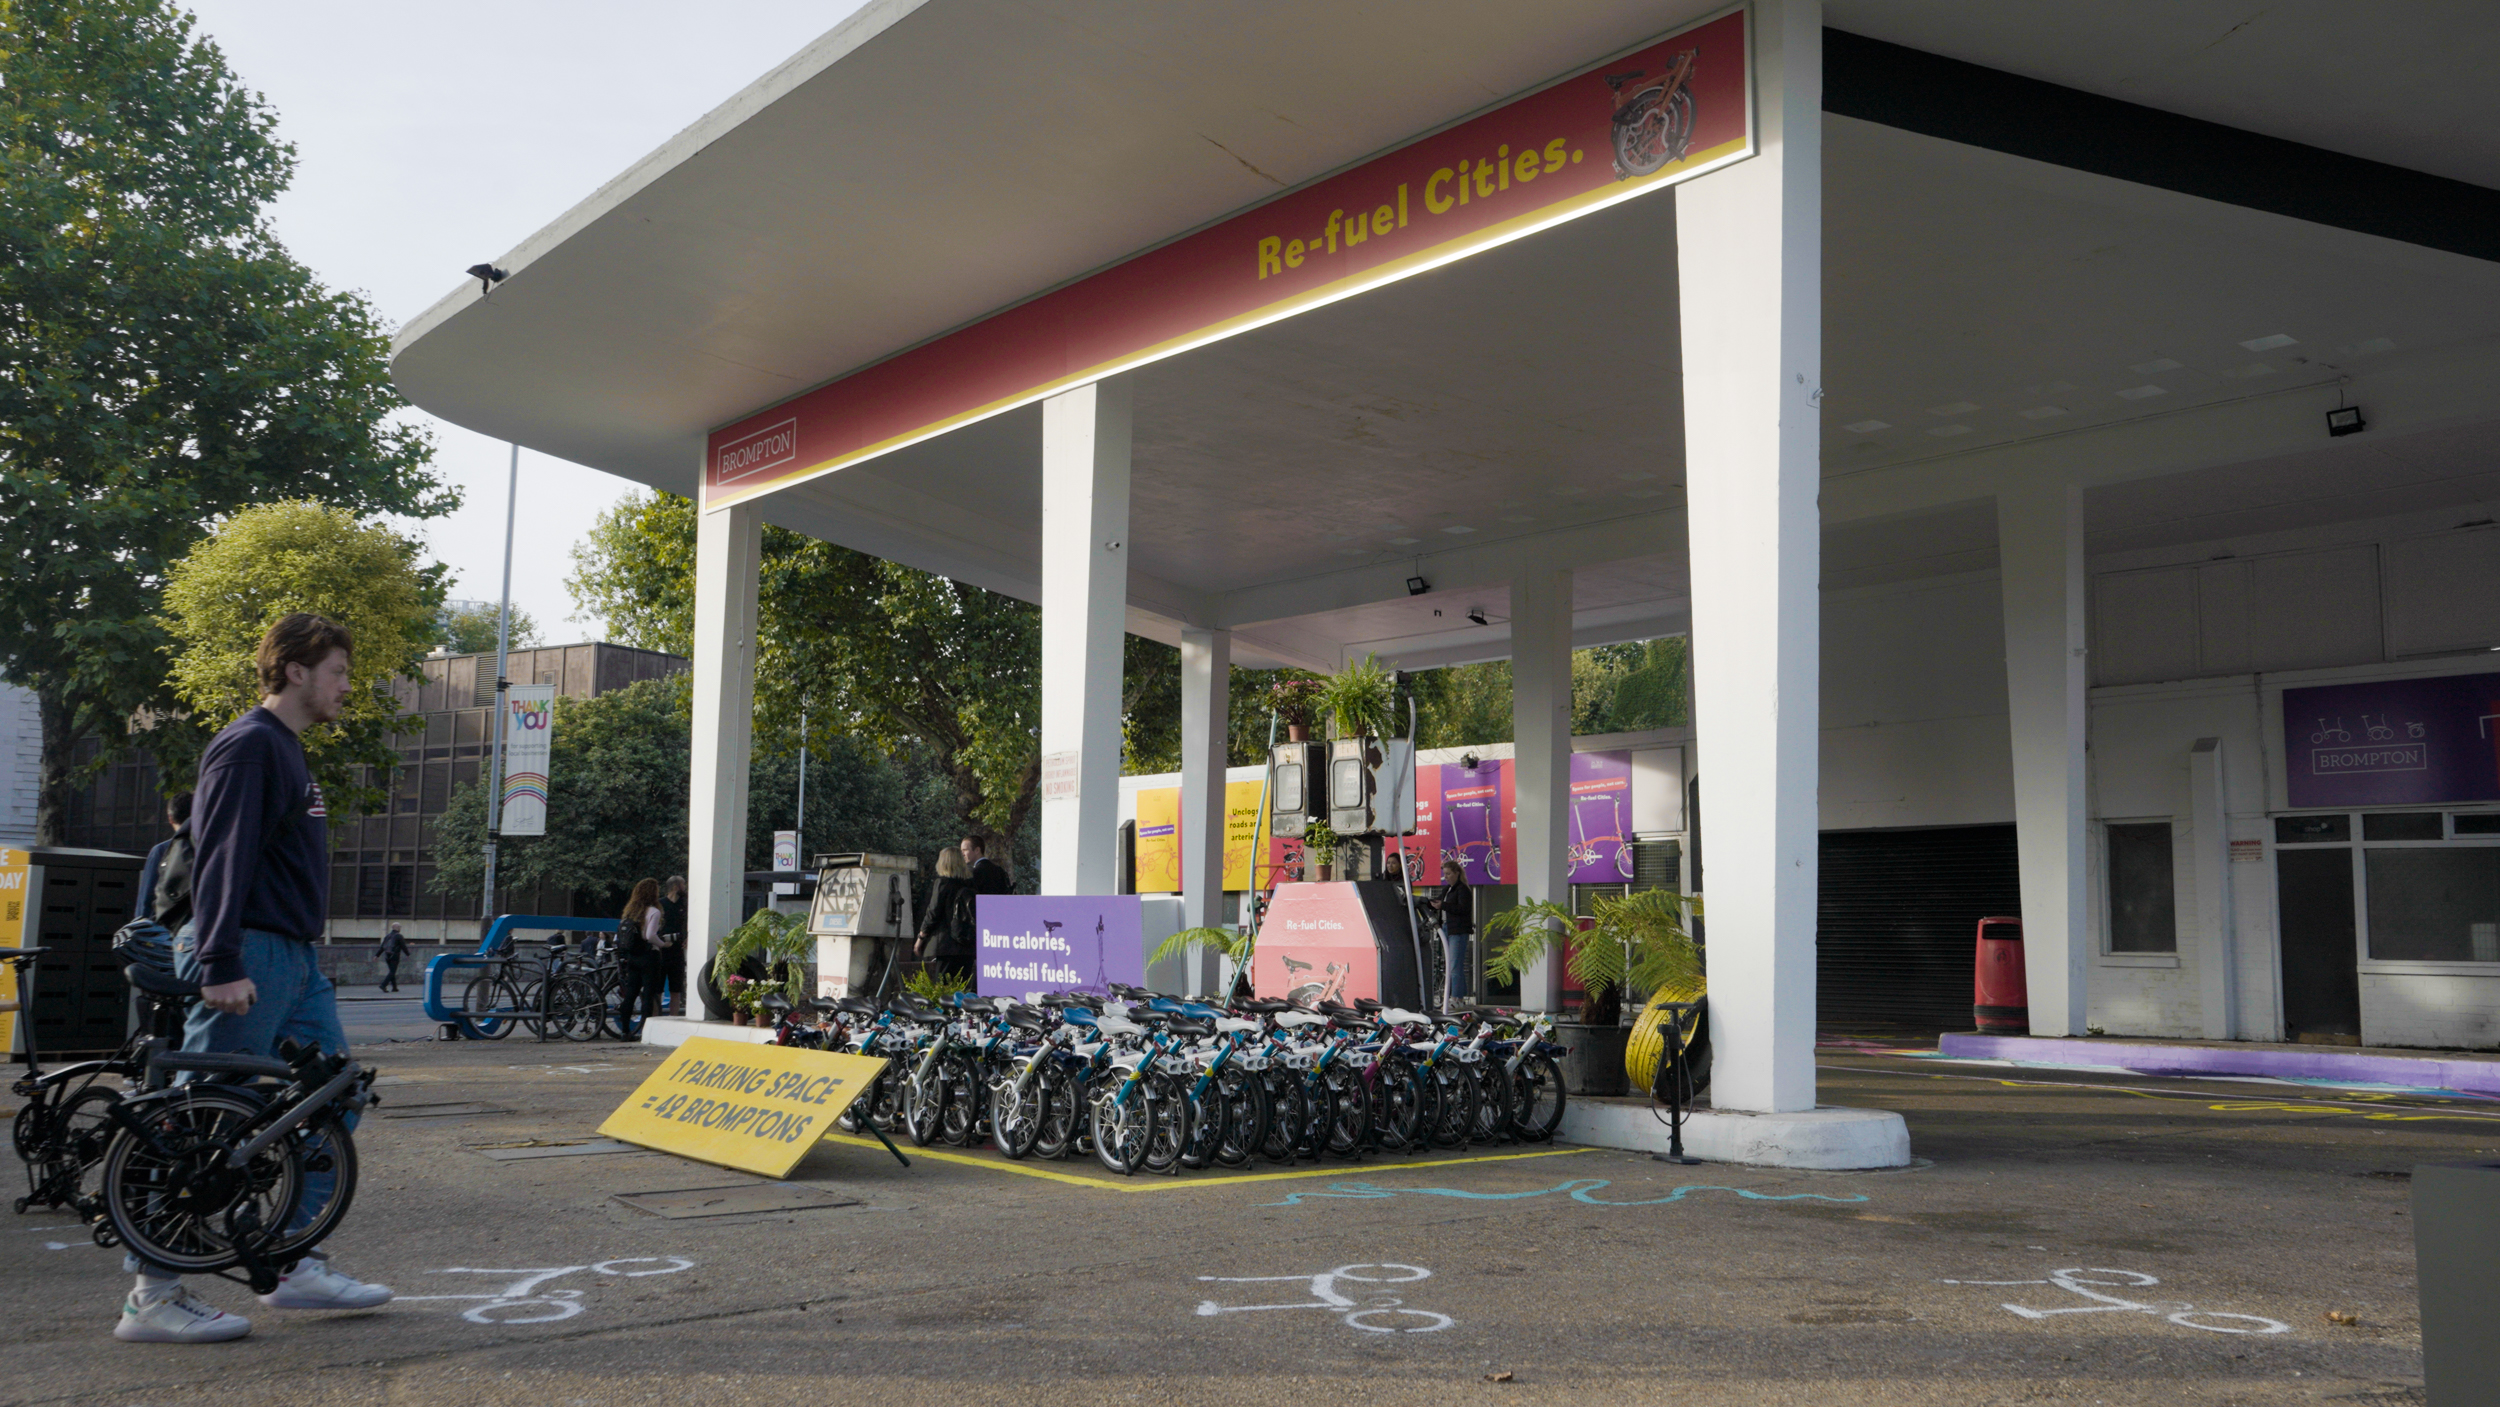 Brompton turns petrol station into green transport hub for car free day